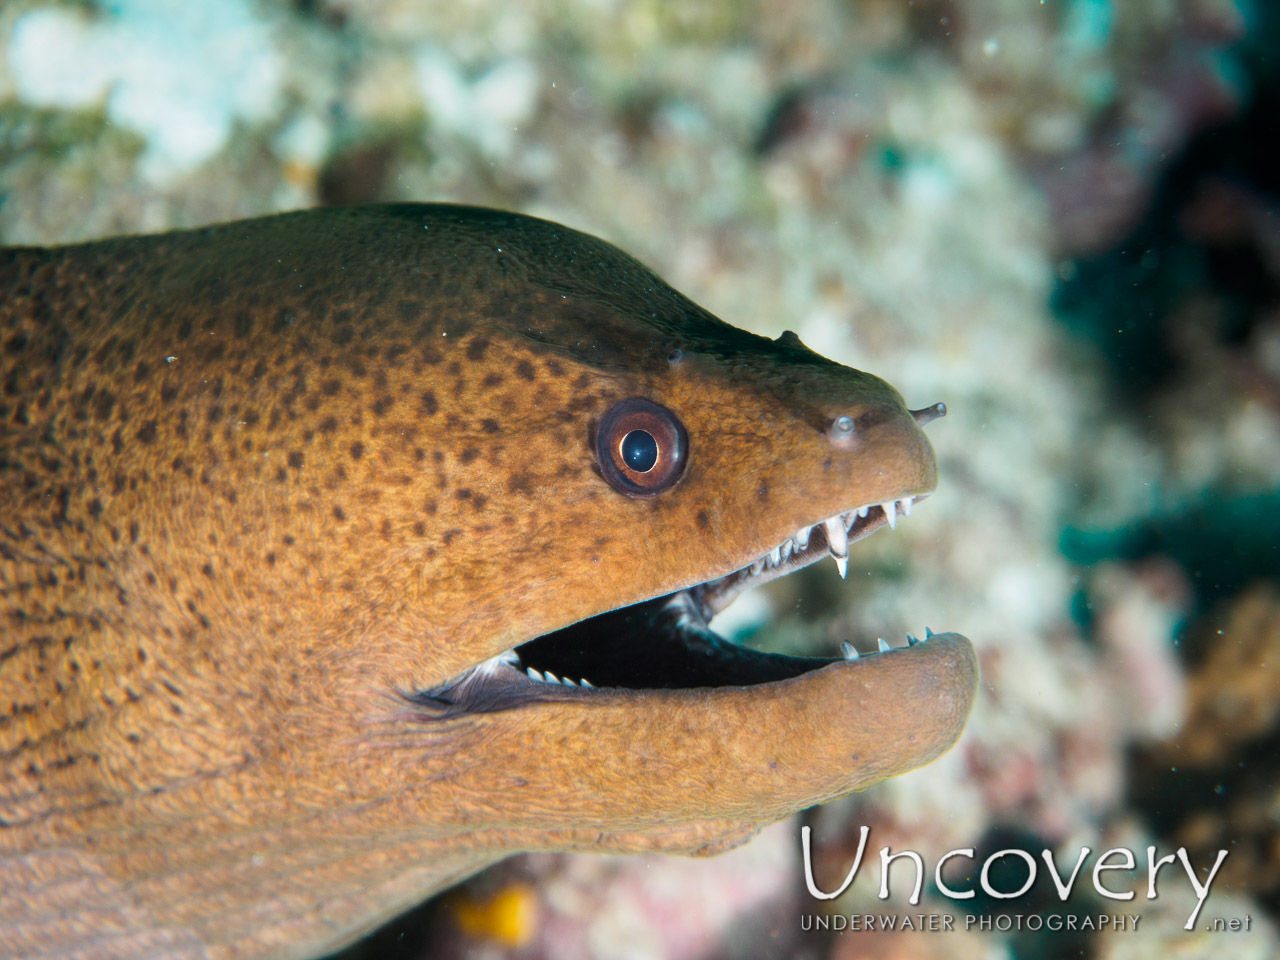 Giant Moray (gymnothorax Javanicus), photo taken in Maldives, Male Atoll, South Male Atoll, Vadhoo Caves